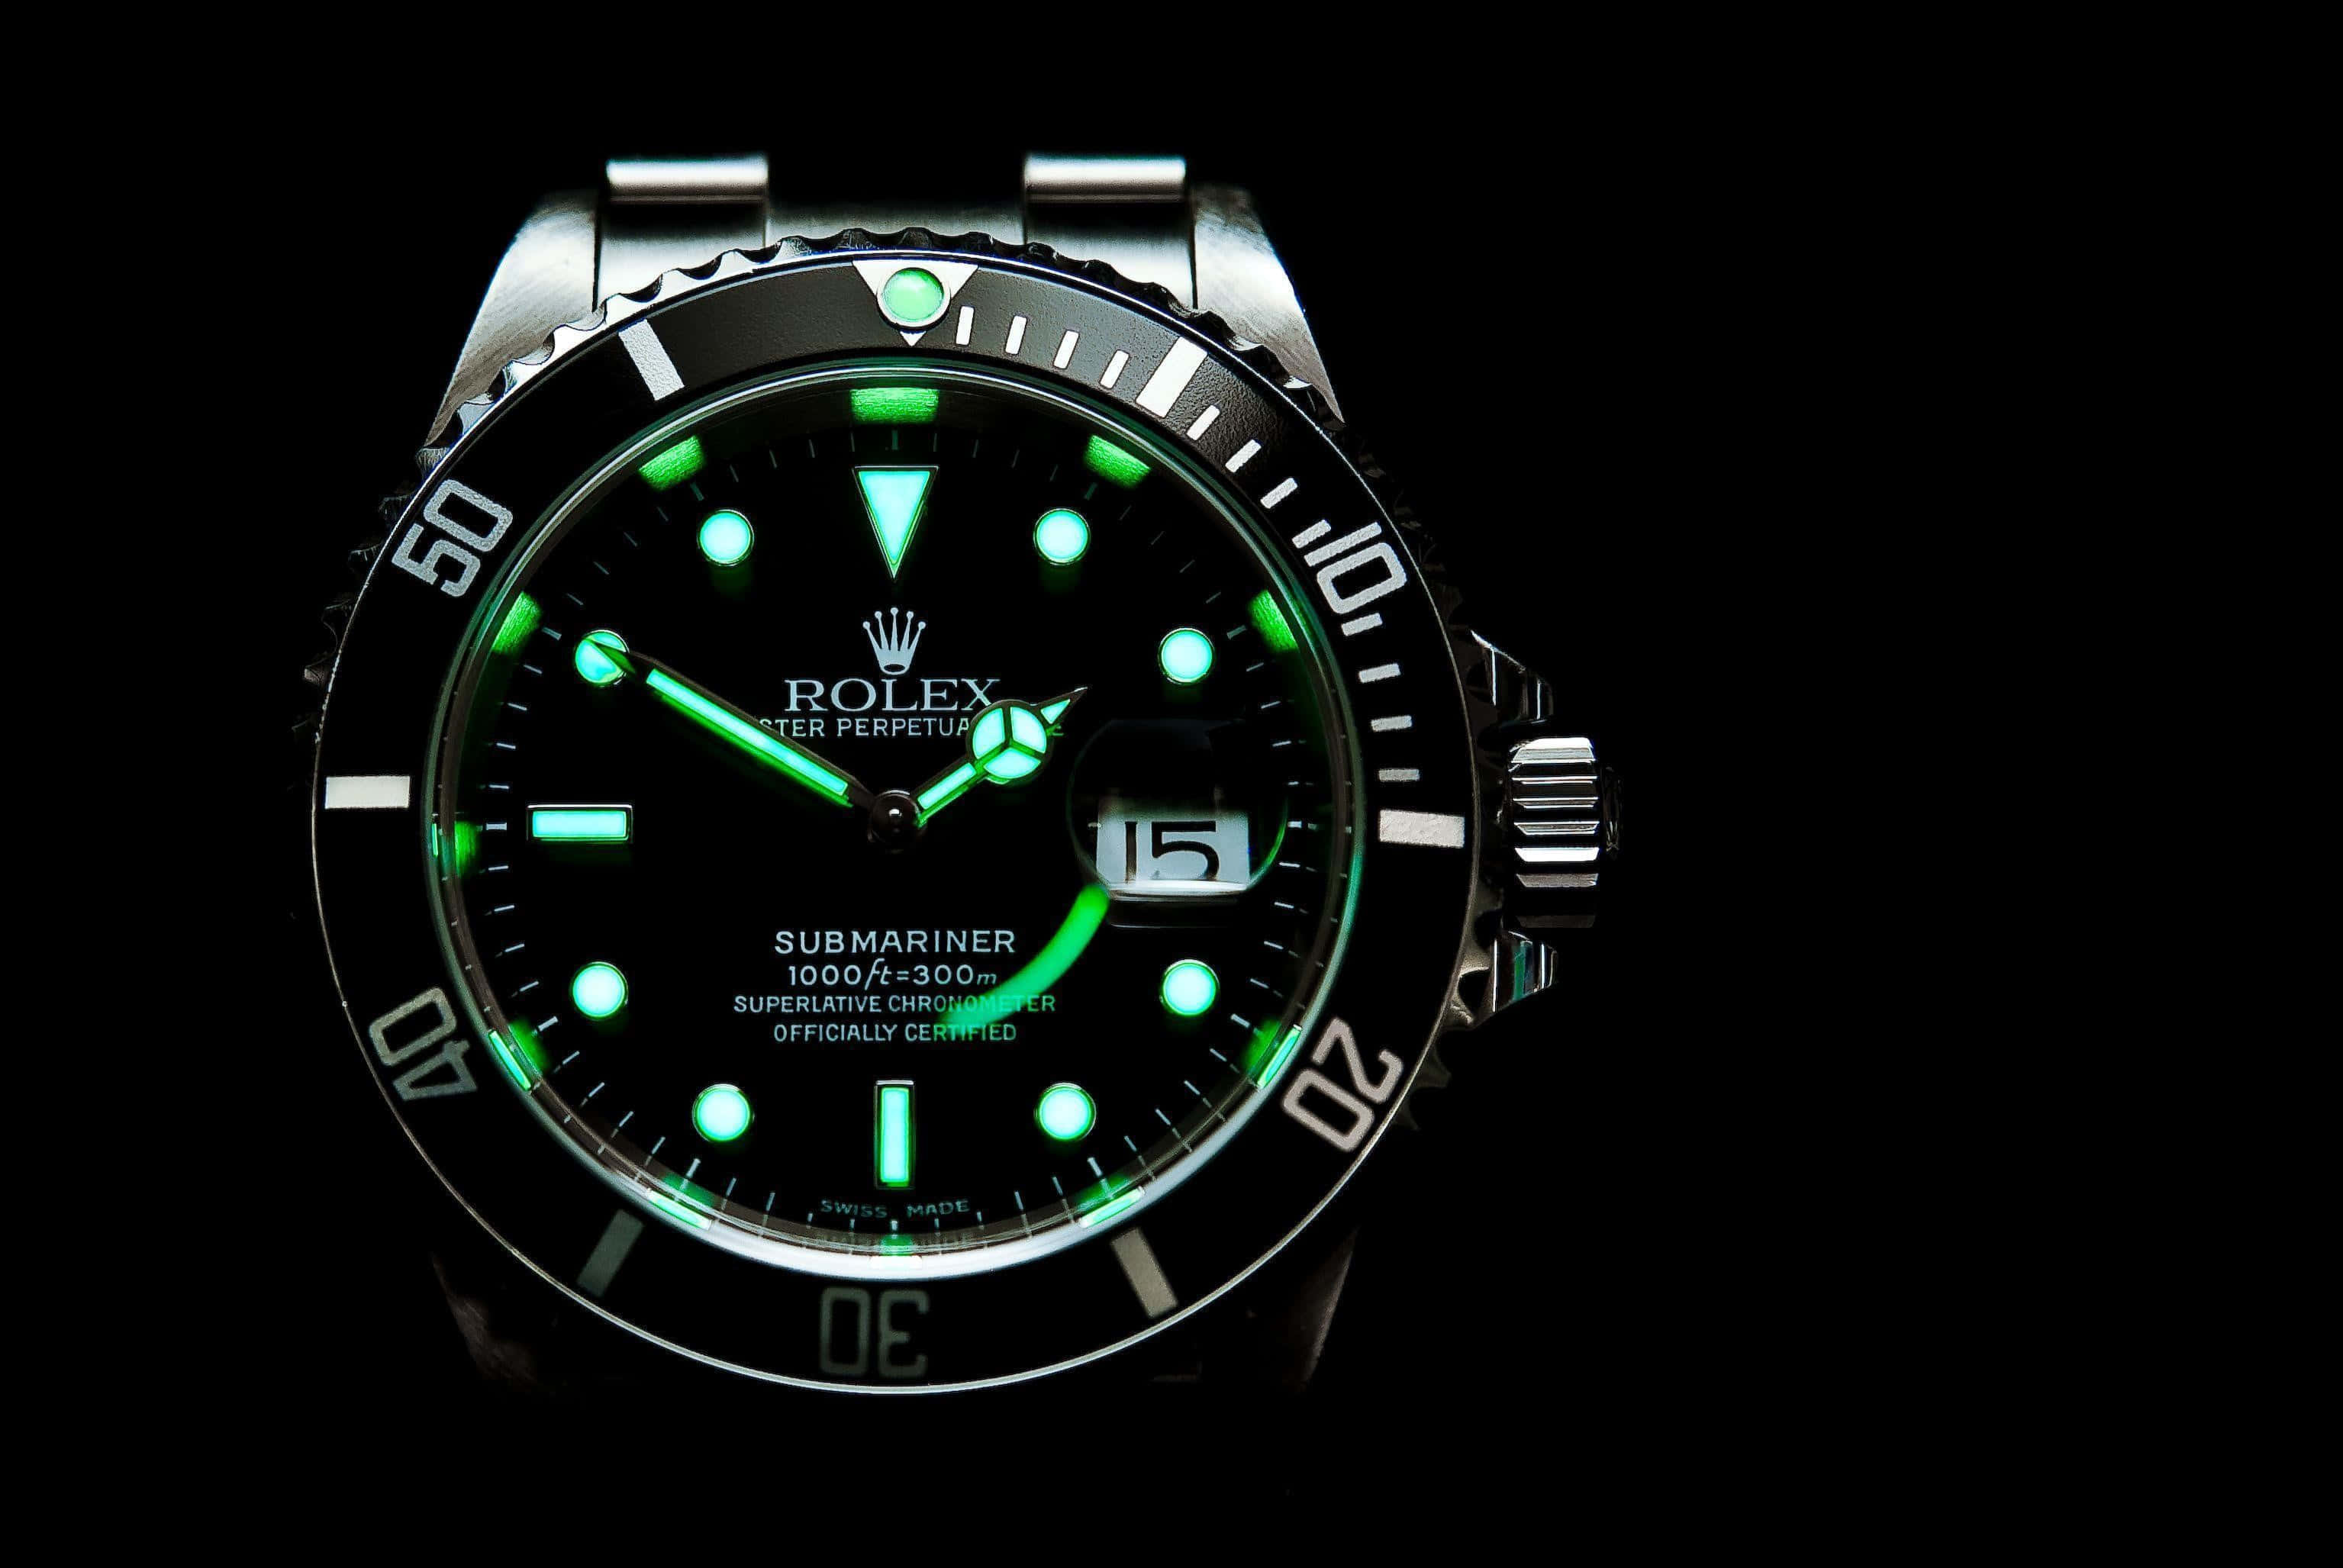 Rolex - The Epitome of Luxury Watches